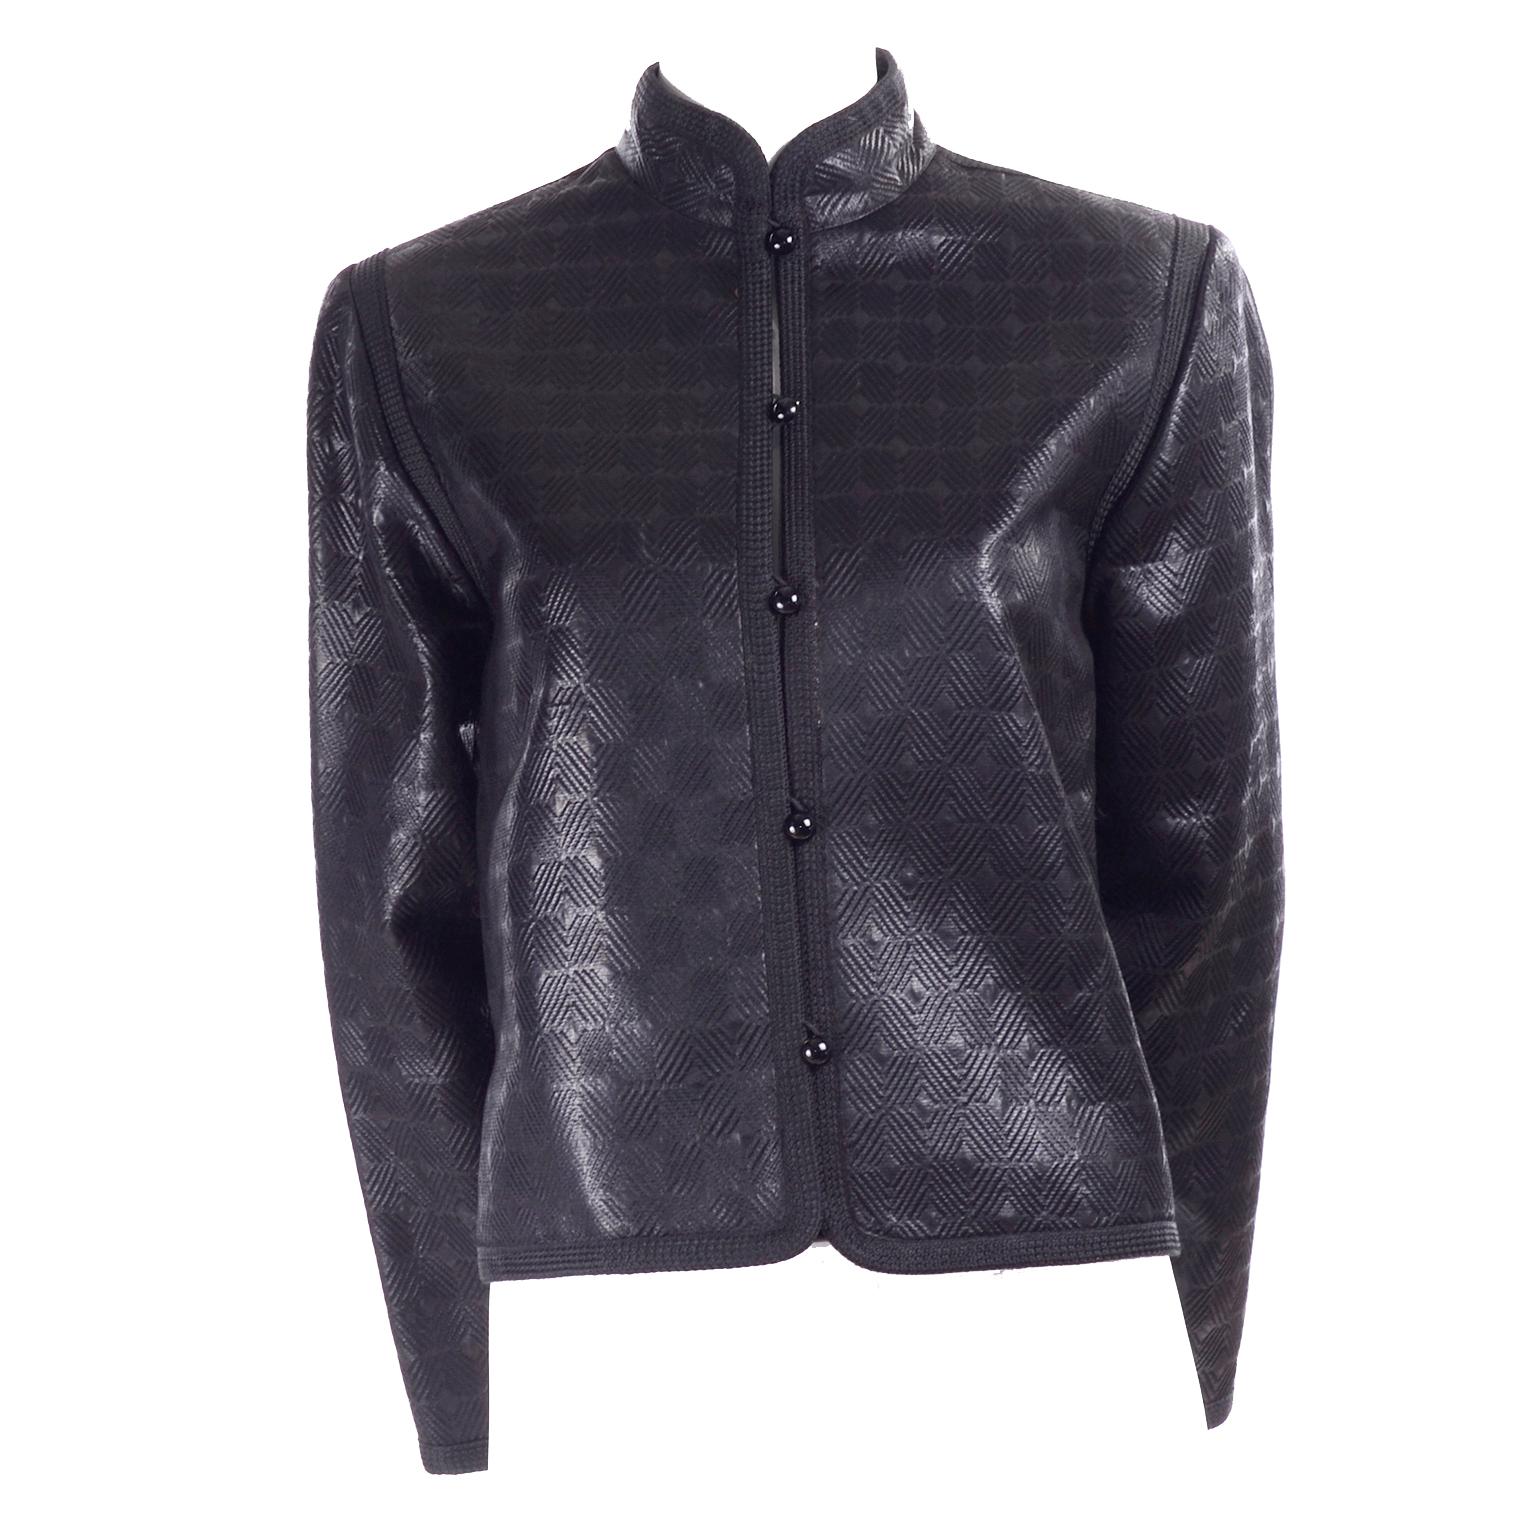 This is a rare Yves Saint Laurent vintage black jacket from the 1970's. It has a textured, quilted abstract graphic design in a structured cotton with a satin sheen, a mandarin collar and wide sleeves.Inspired by Russian bohemians and peasants, this